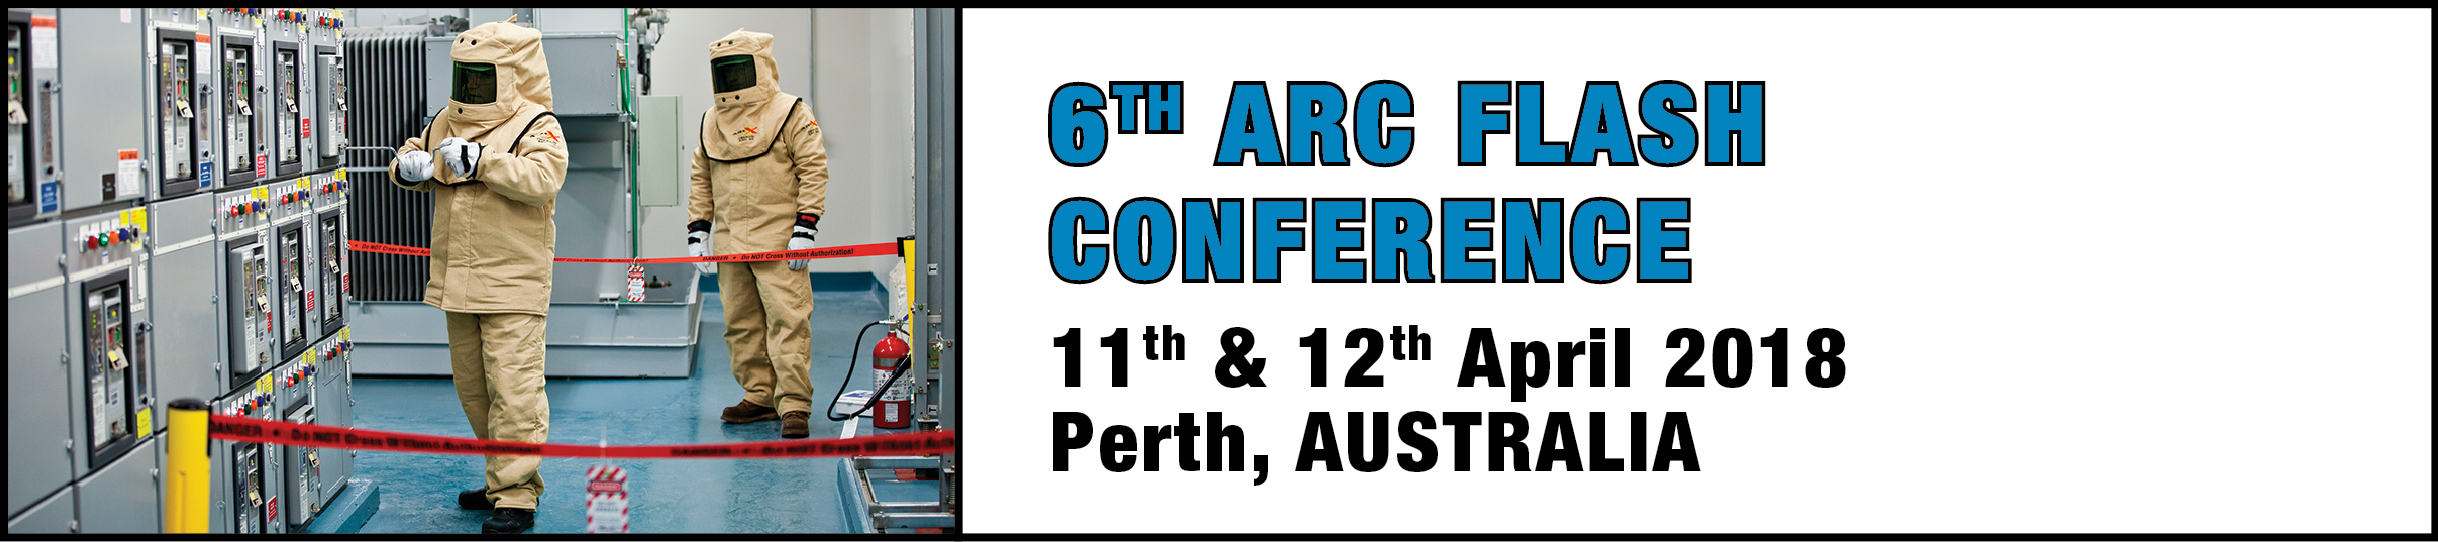 6th Arc flash conference